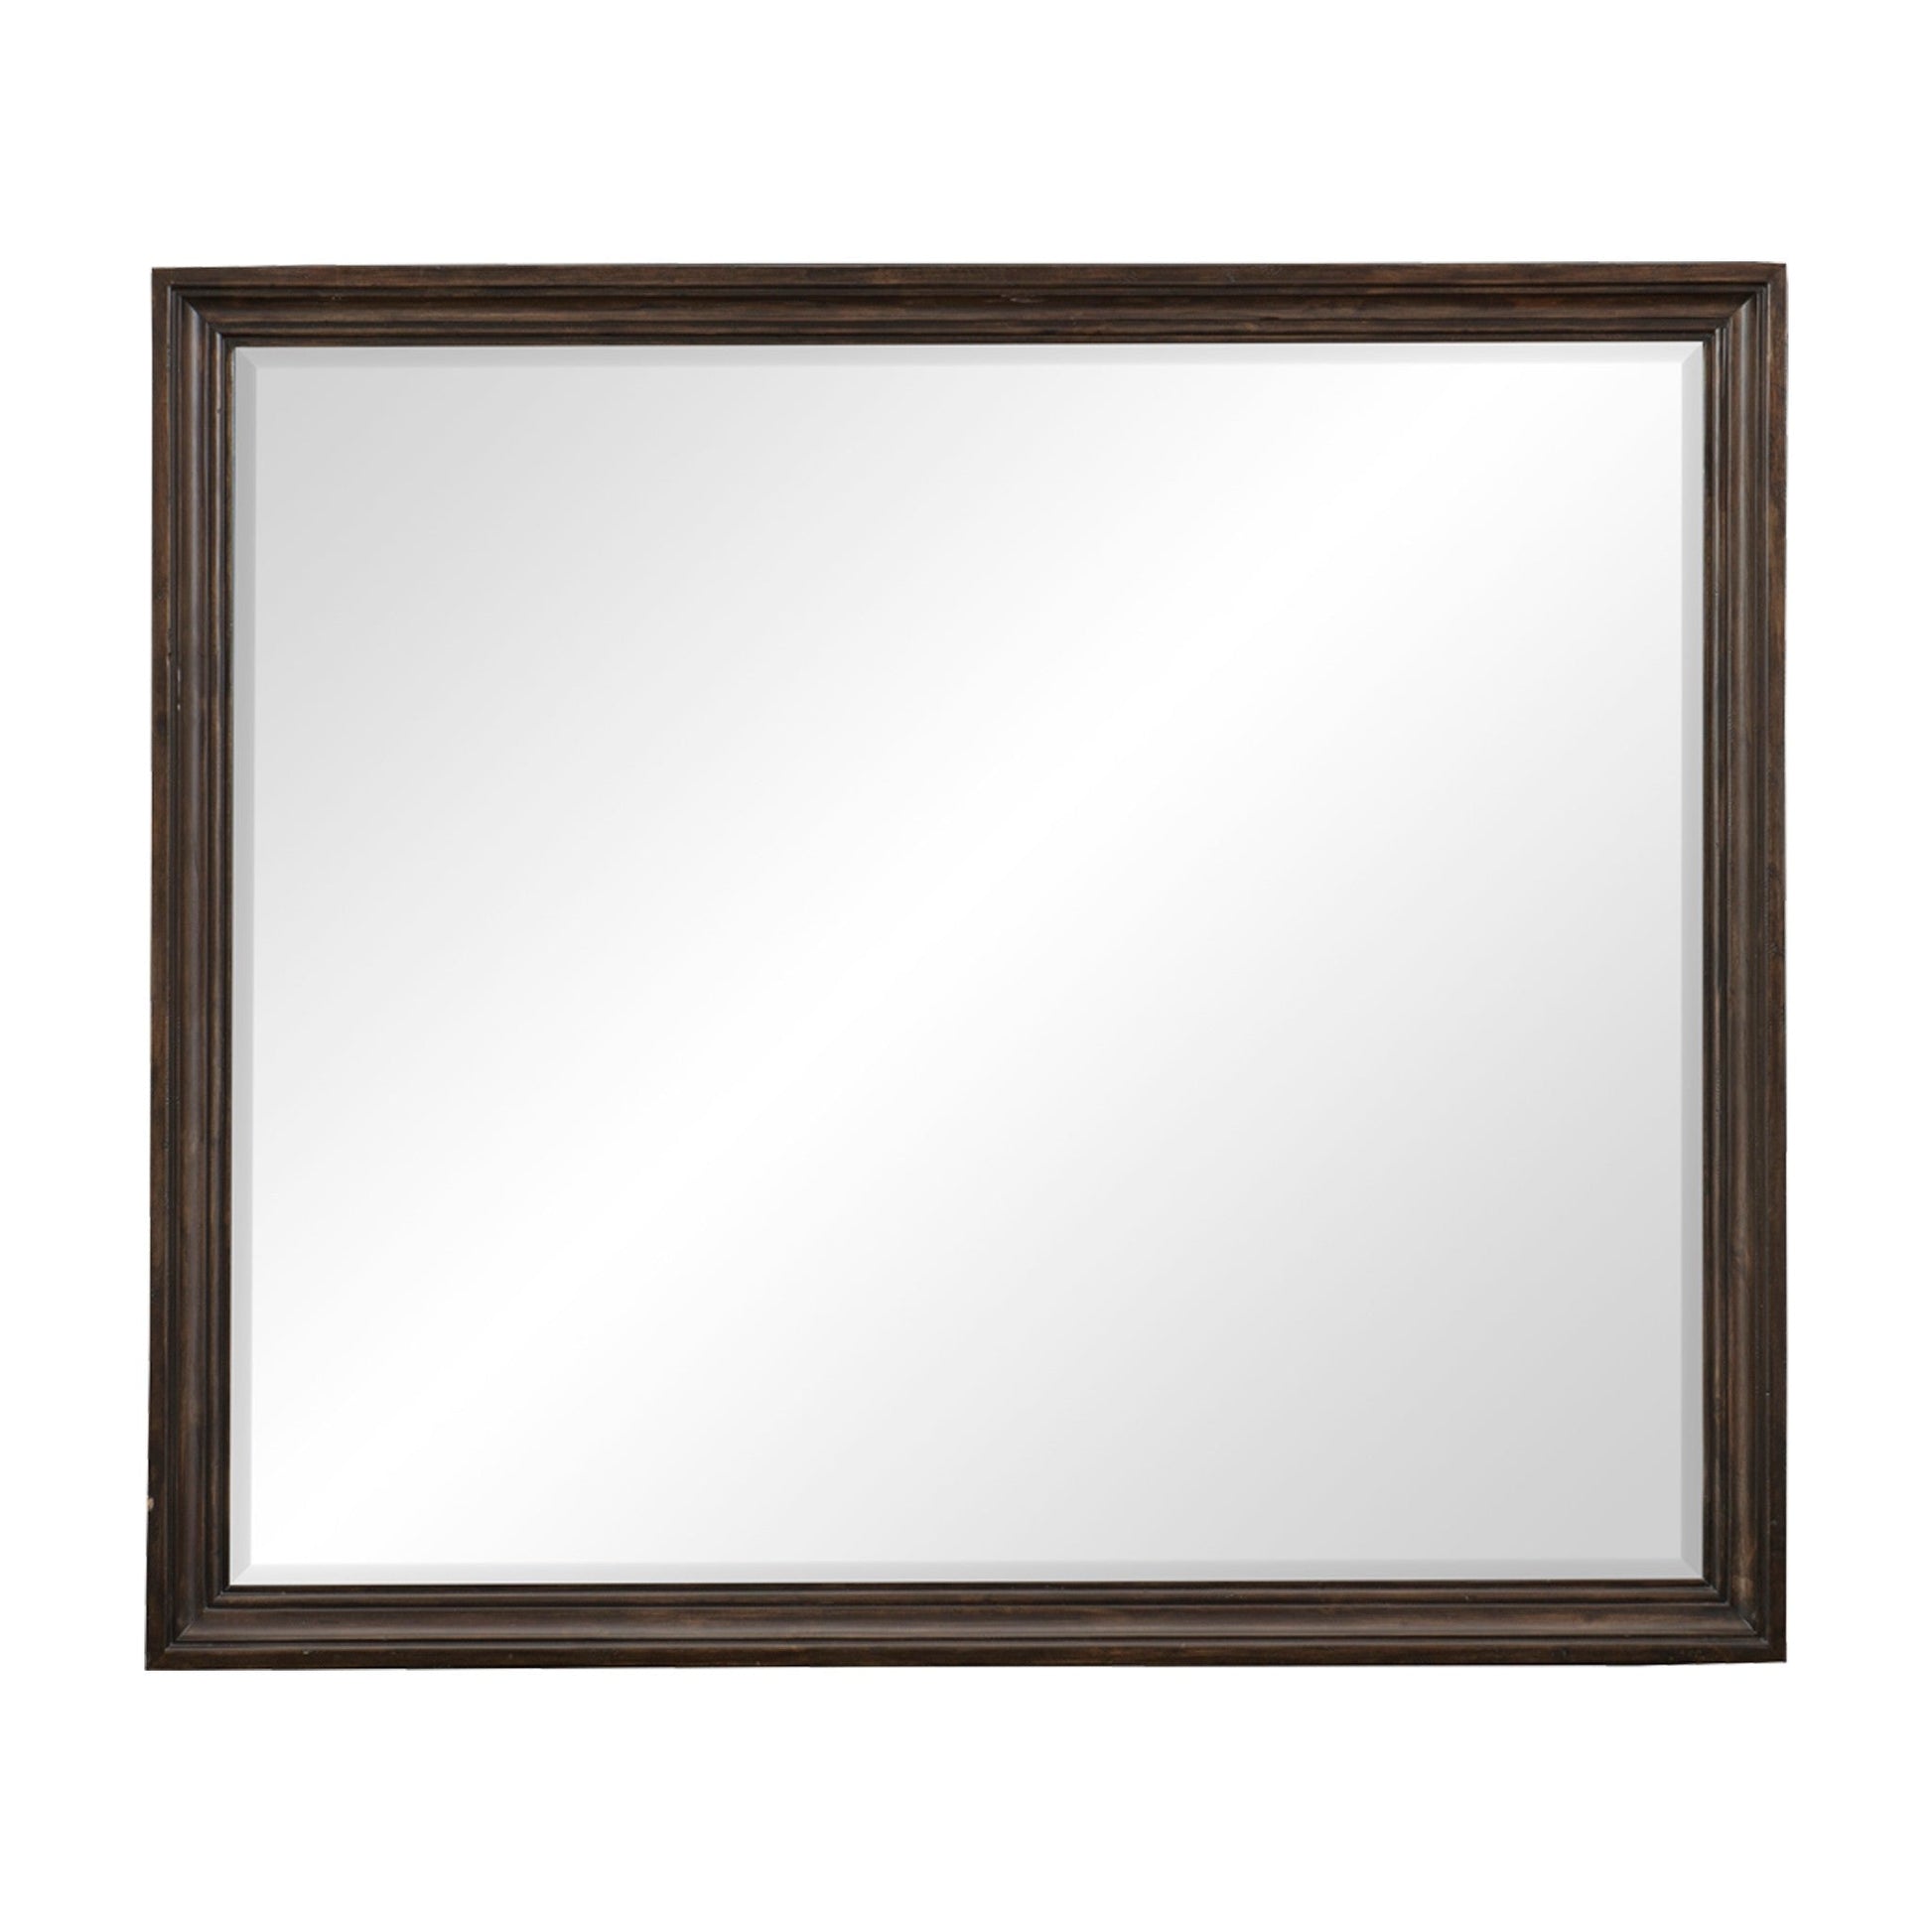 Benzara Brown Wooden Square Mirror With Molded Details and Bevelled Edges